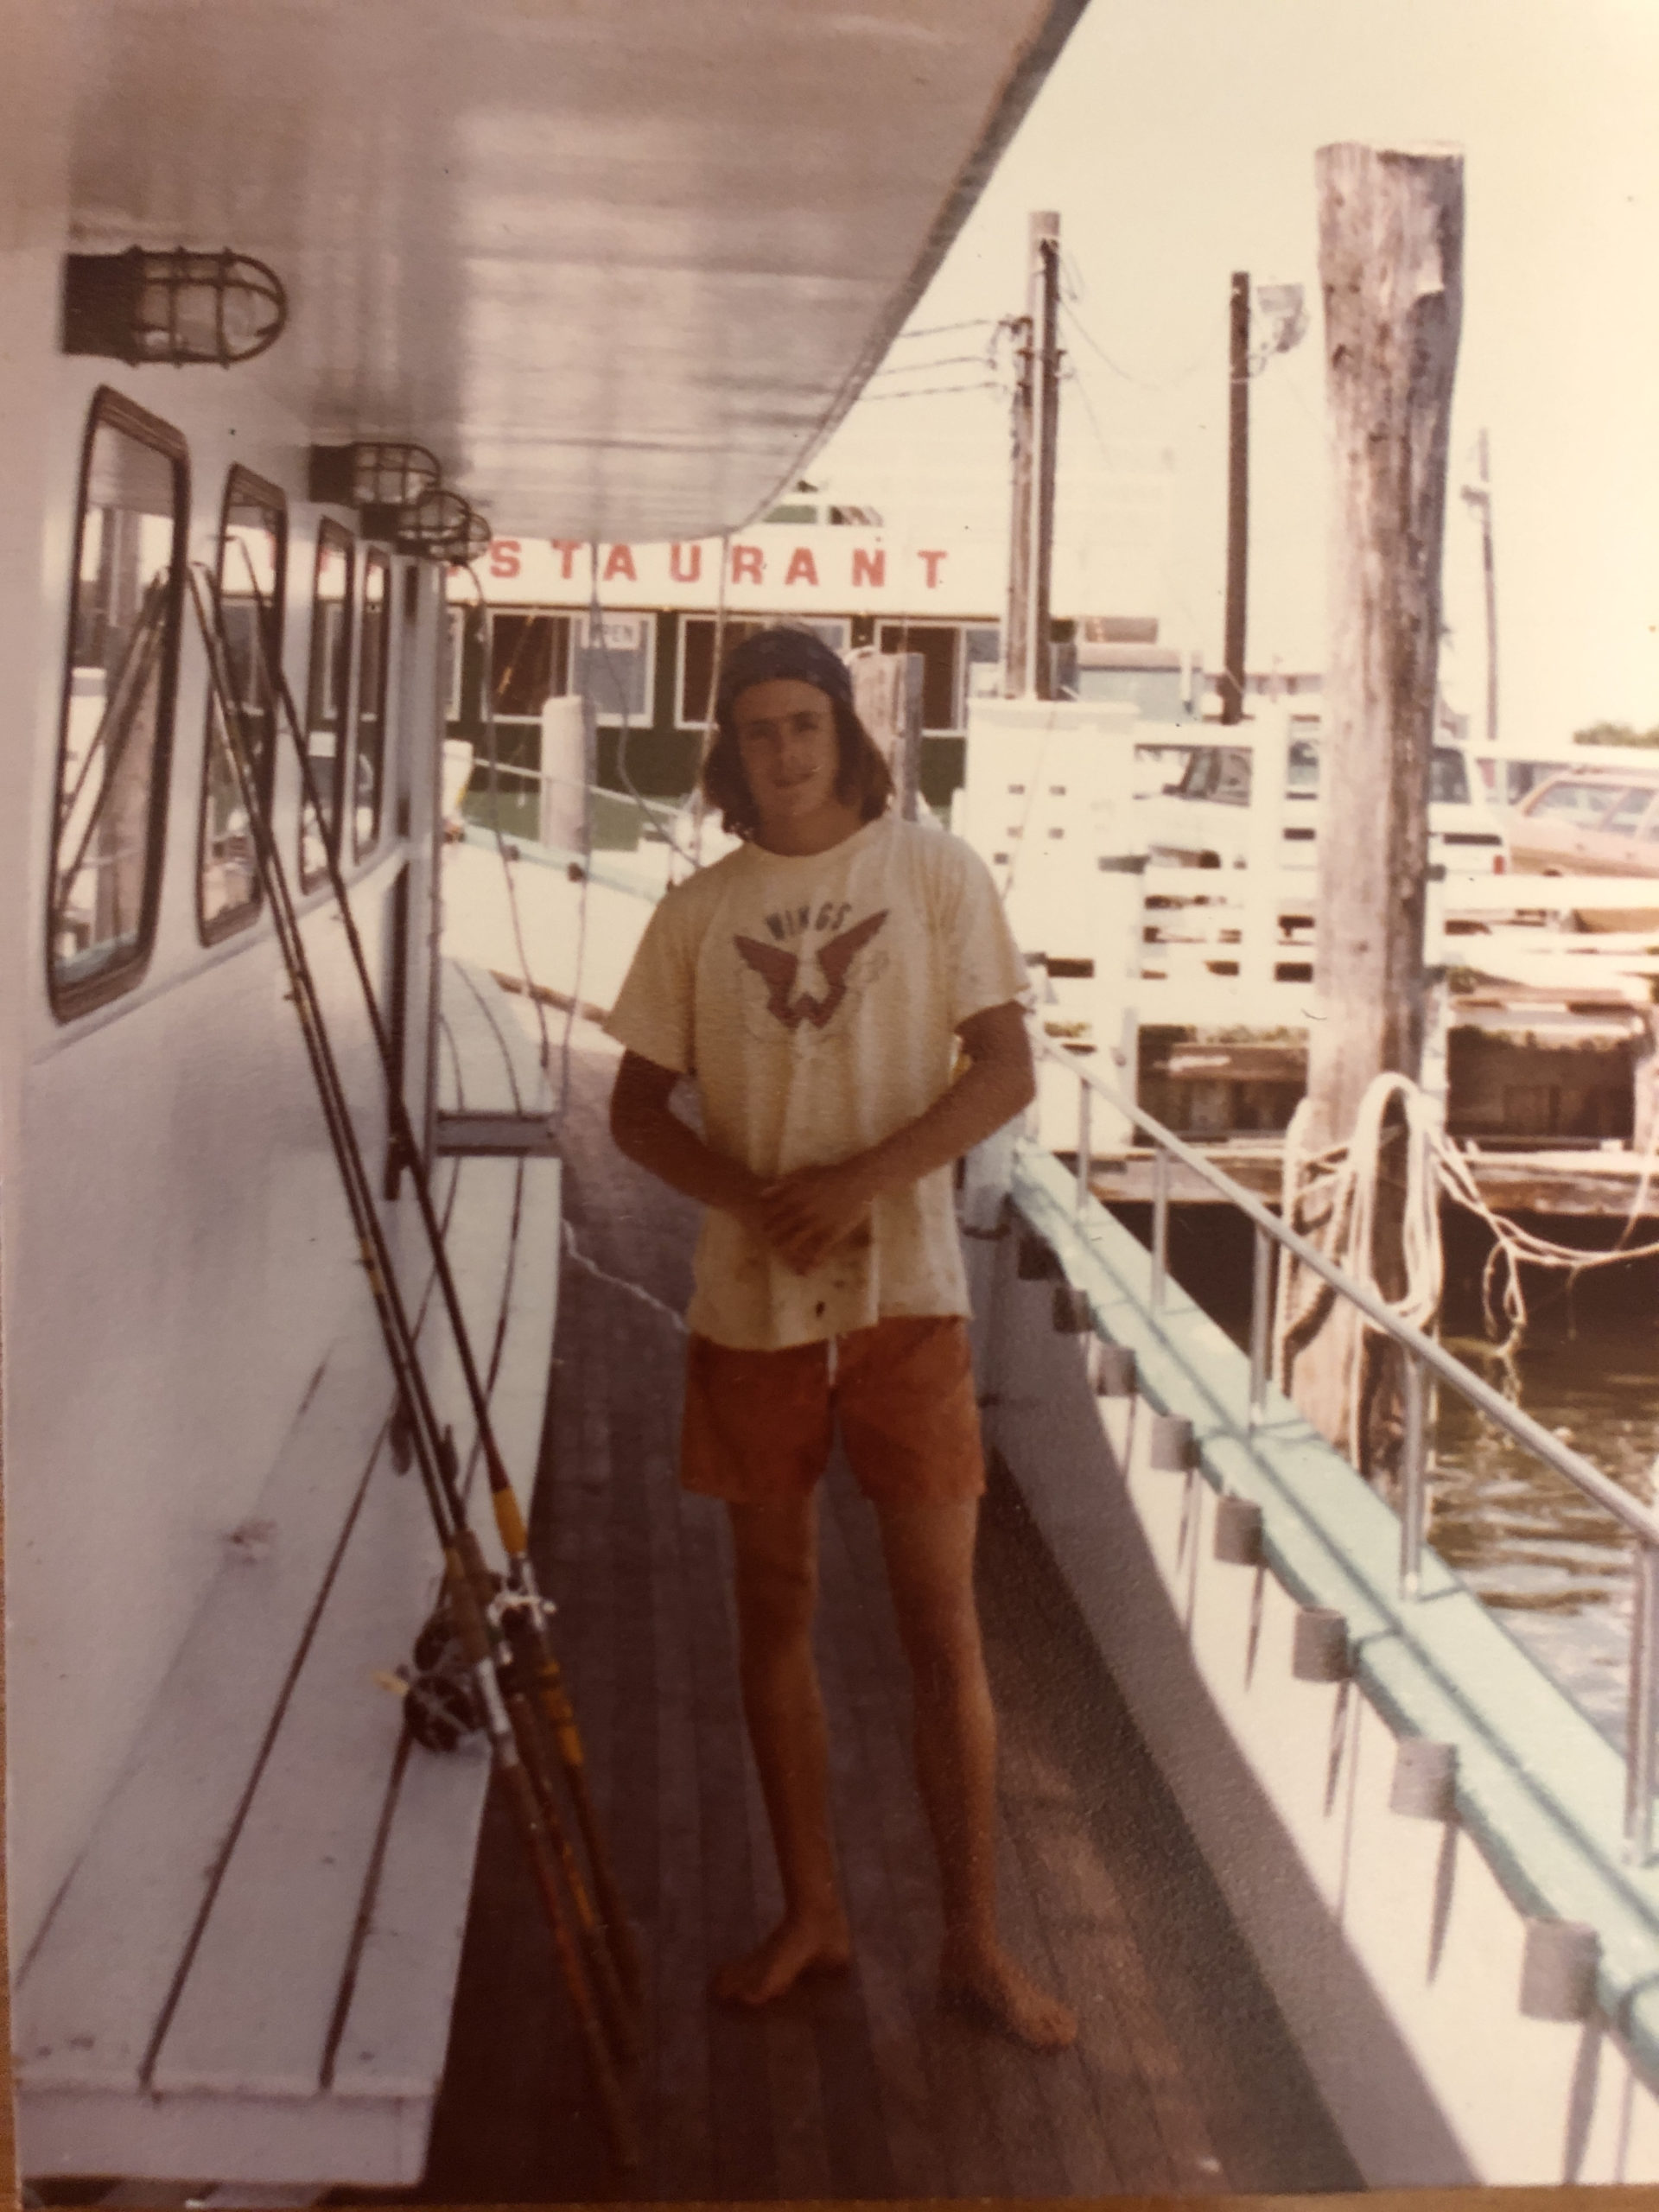 David Connick on the Docks. Courtesy Cathy Pradie-Connick